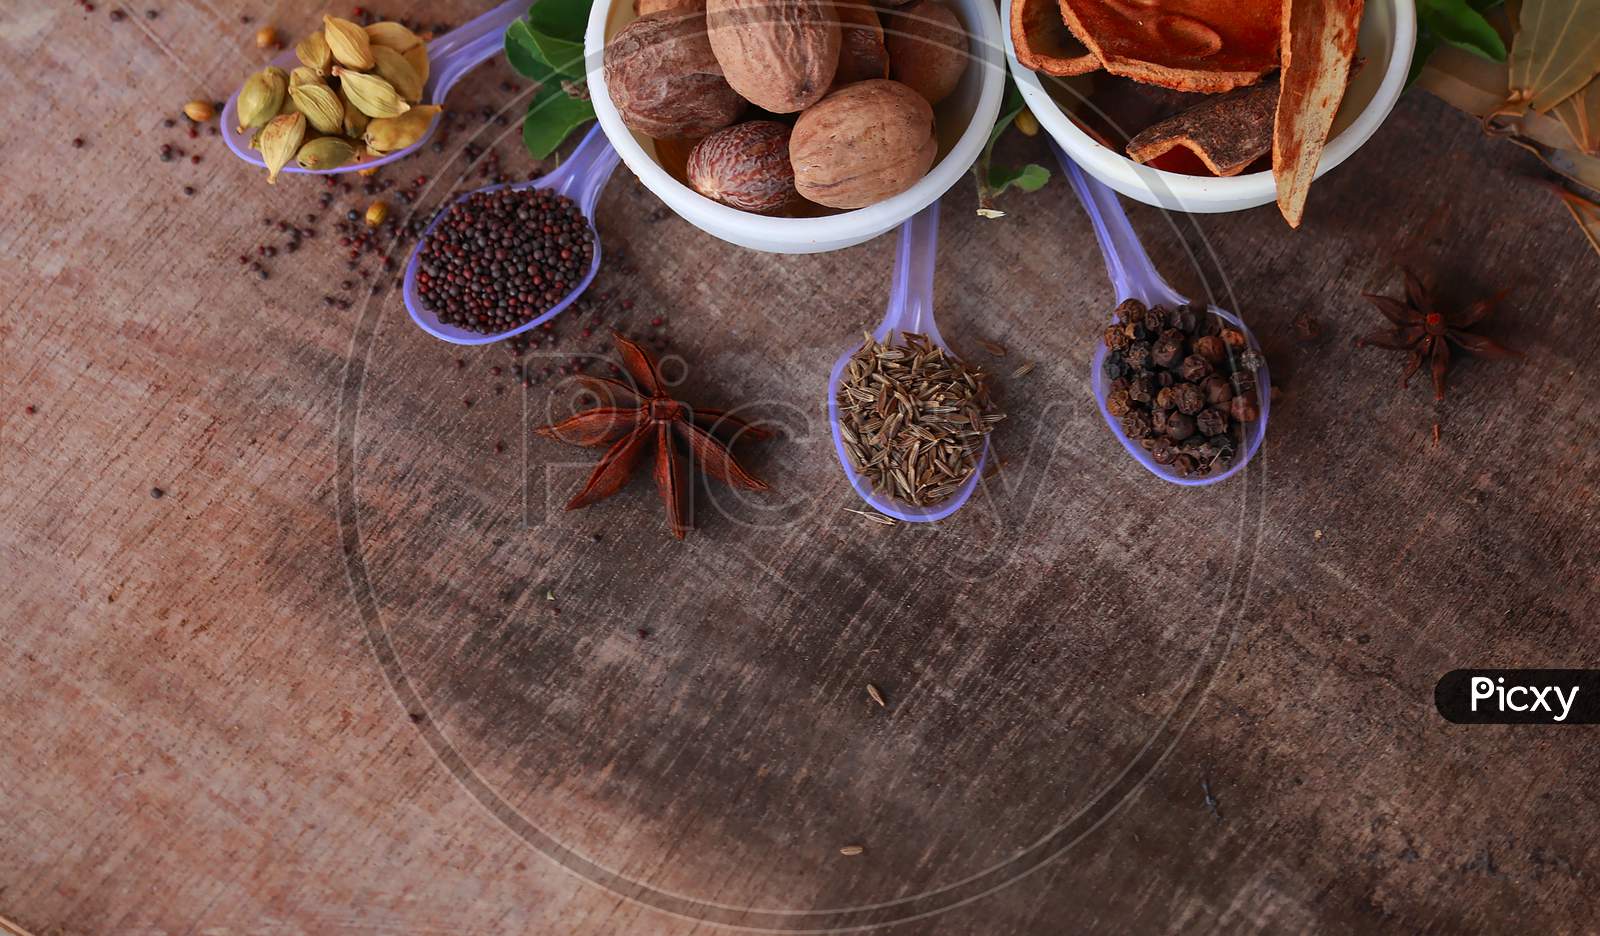 Spice Background, Top View.Rotation All Indian Spices On Wooden Table,Indian Cuisine,Cumin, Black Pepper, Cloves, Cardamom, Fennel, Bay Leaf,Background Rotating,